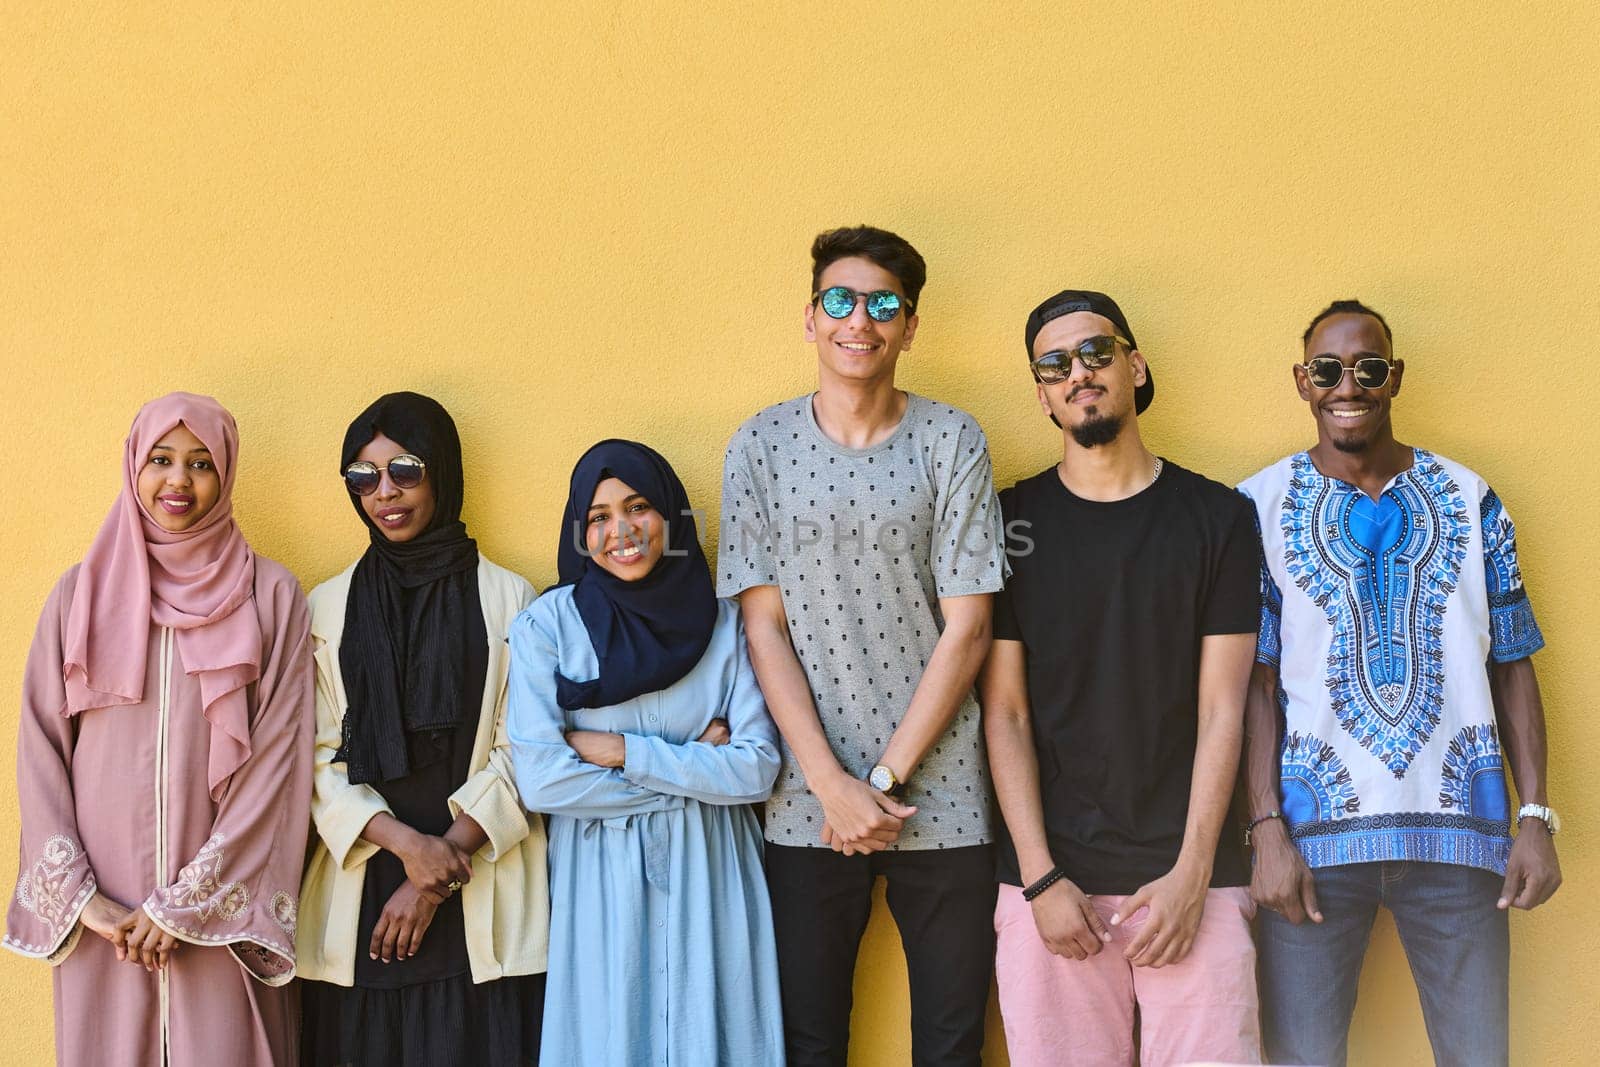 A diverse group of African-American and Middle Eastern teenagers stand confidently in front of a vibrant yellow wall, showcasing unity and urban style